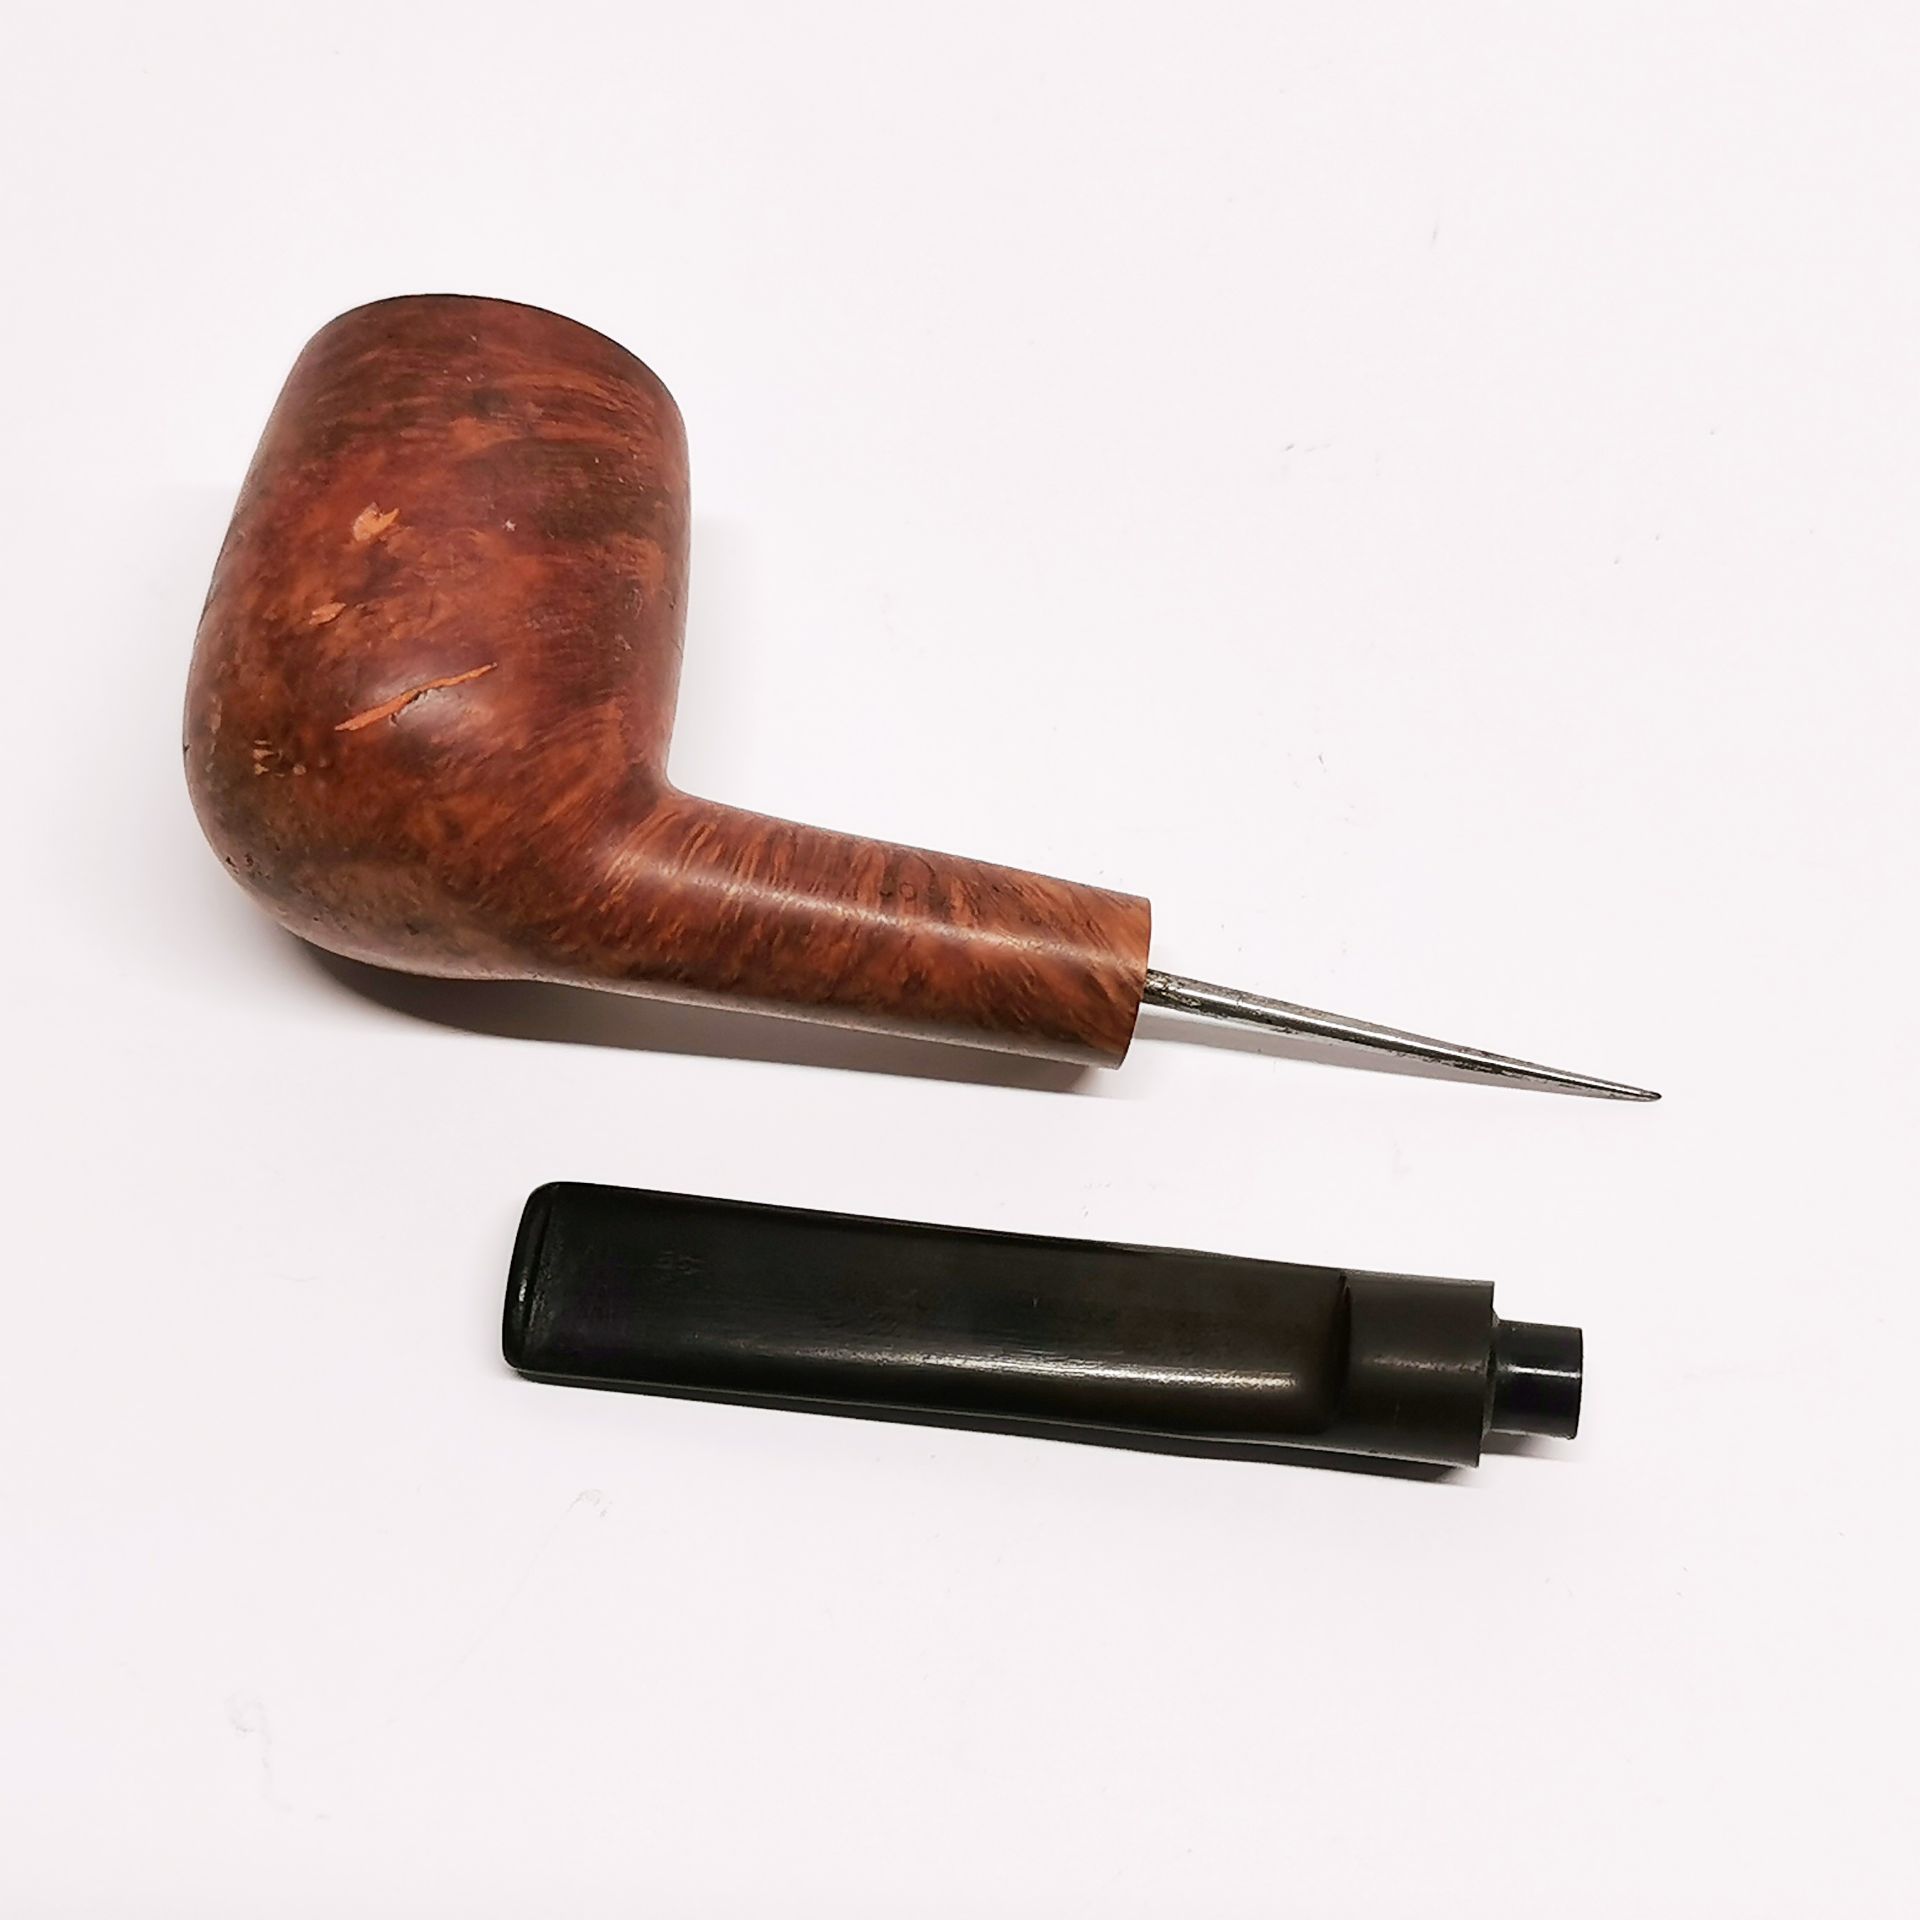 A vintage post war SOE/MI6 style assassins concealed knife tobacco pipe by Virgin, Copenhagen. The - Image 2 of 3